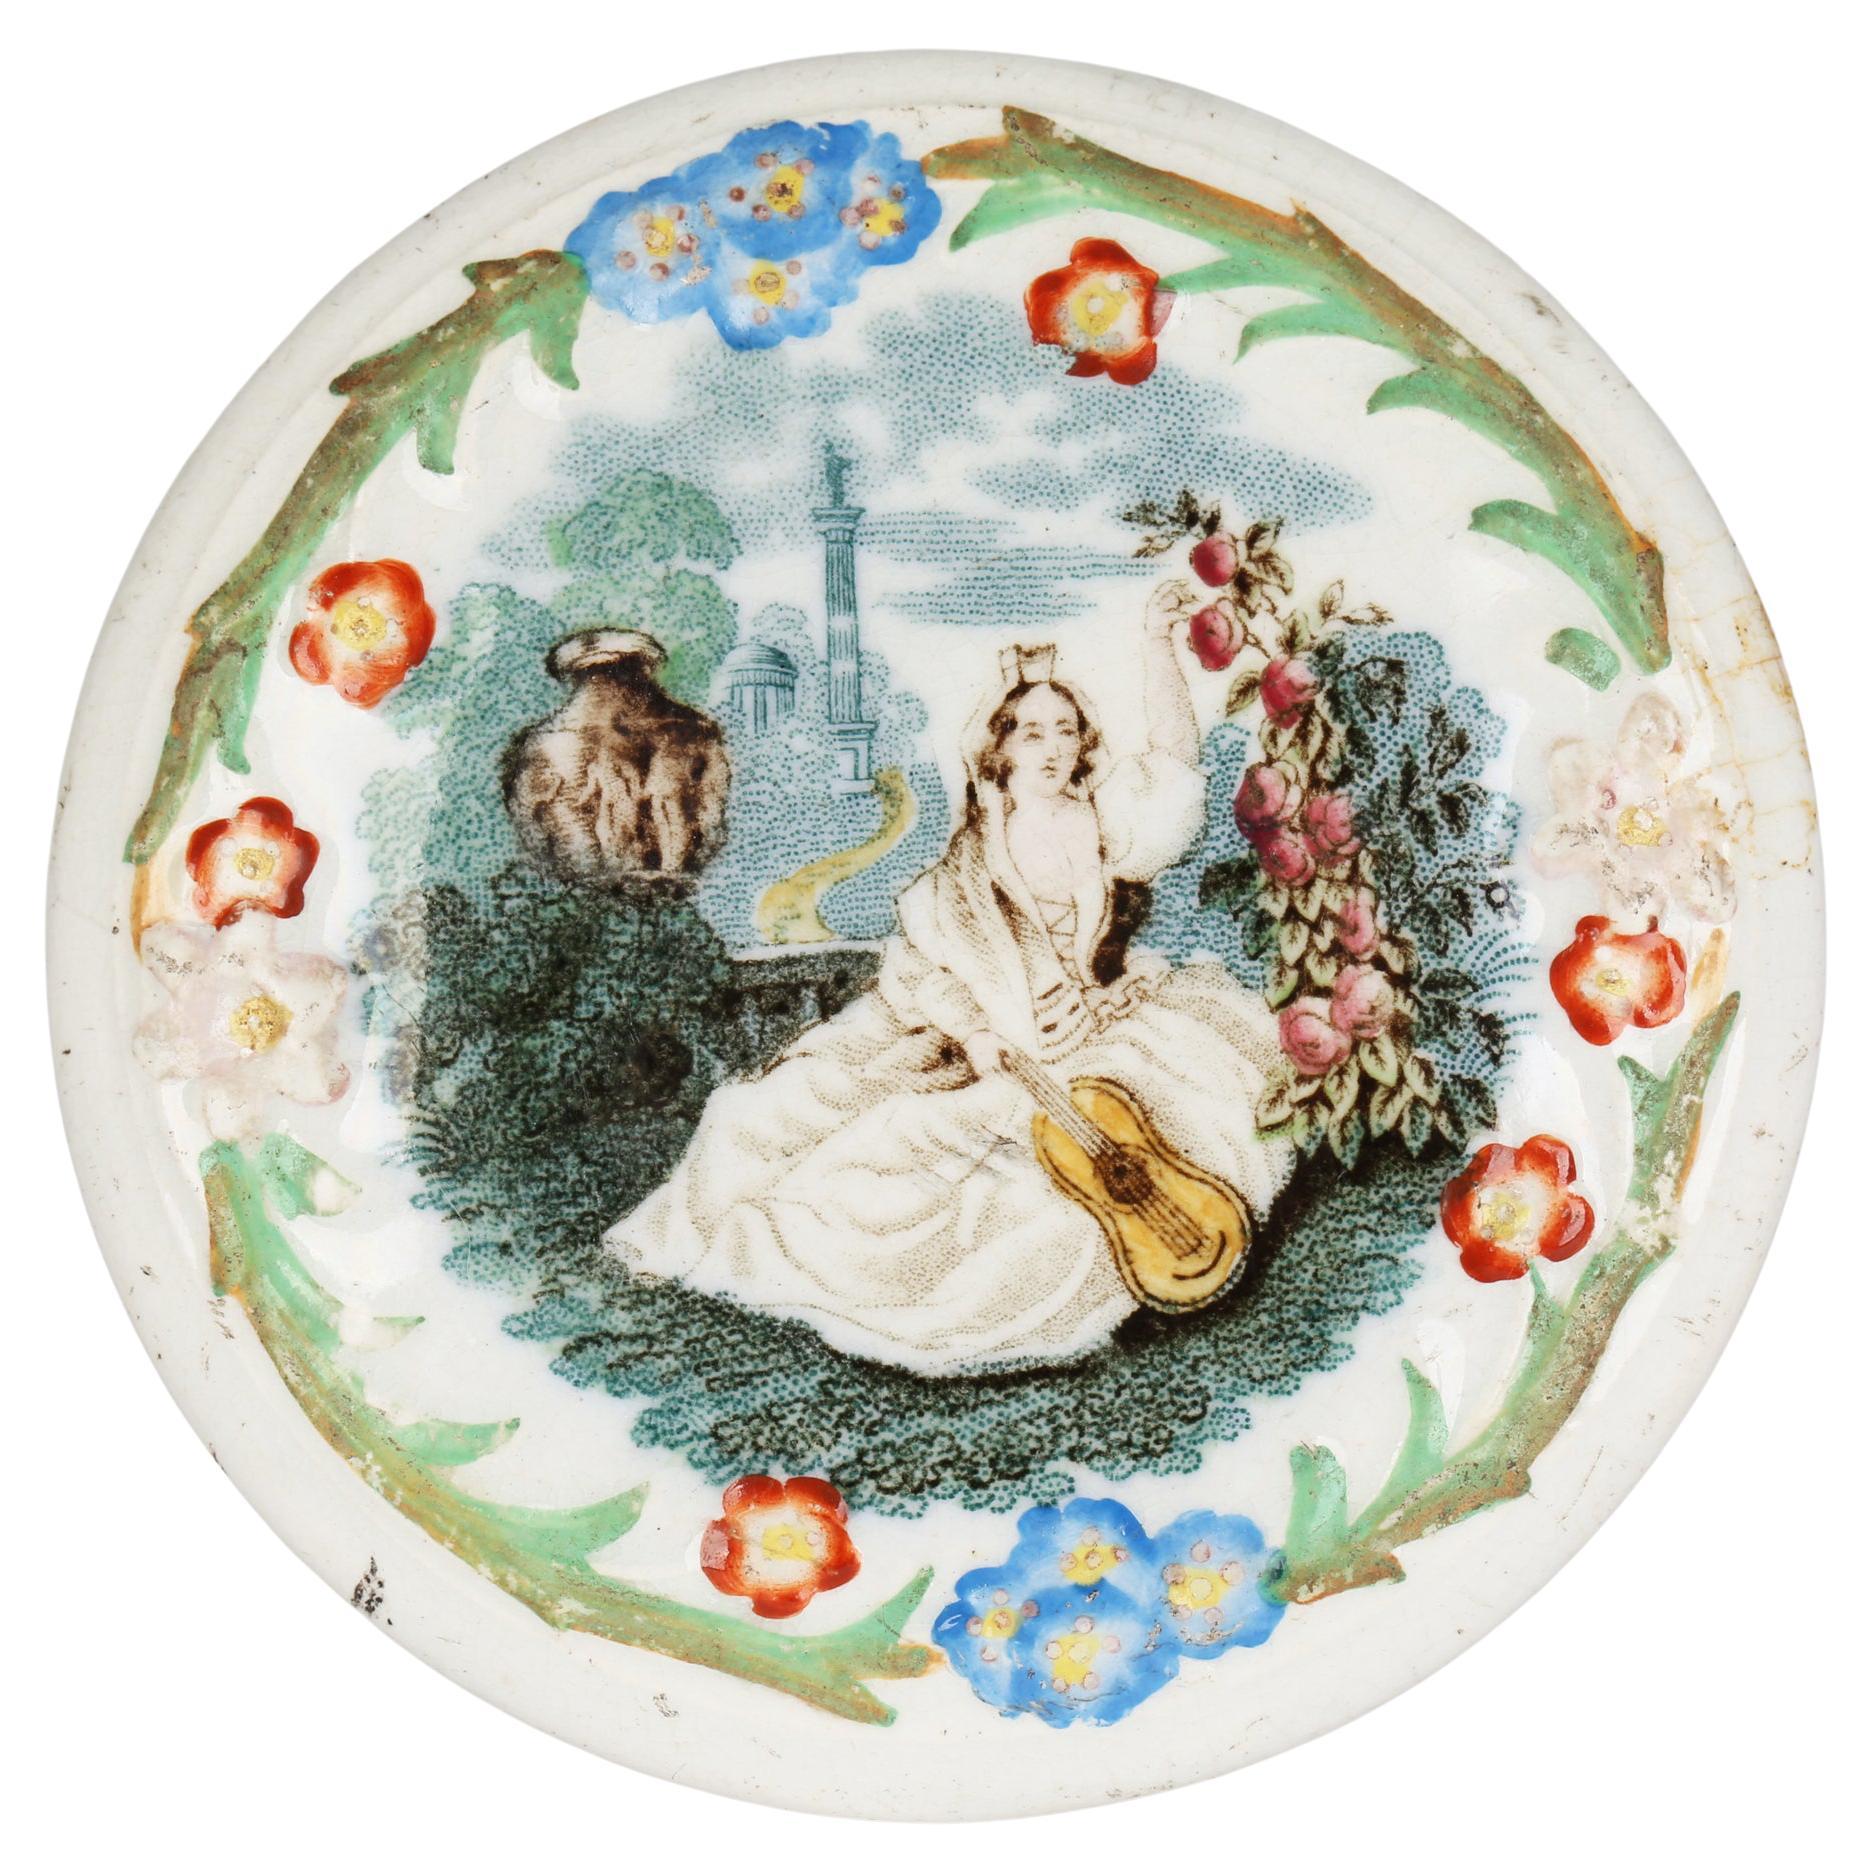 Jenny Lind Rare Printed and Hand Painted Pot Lid Attributed to Ridgway